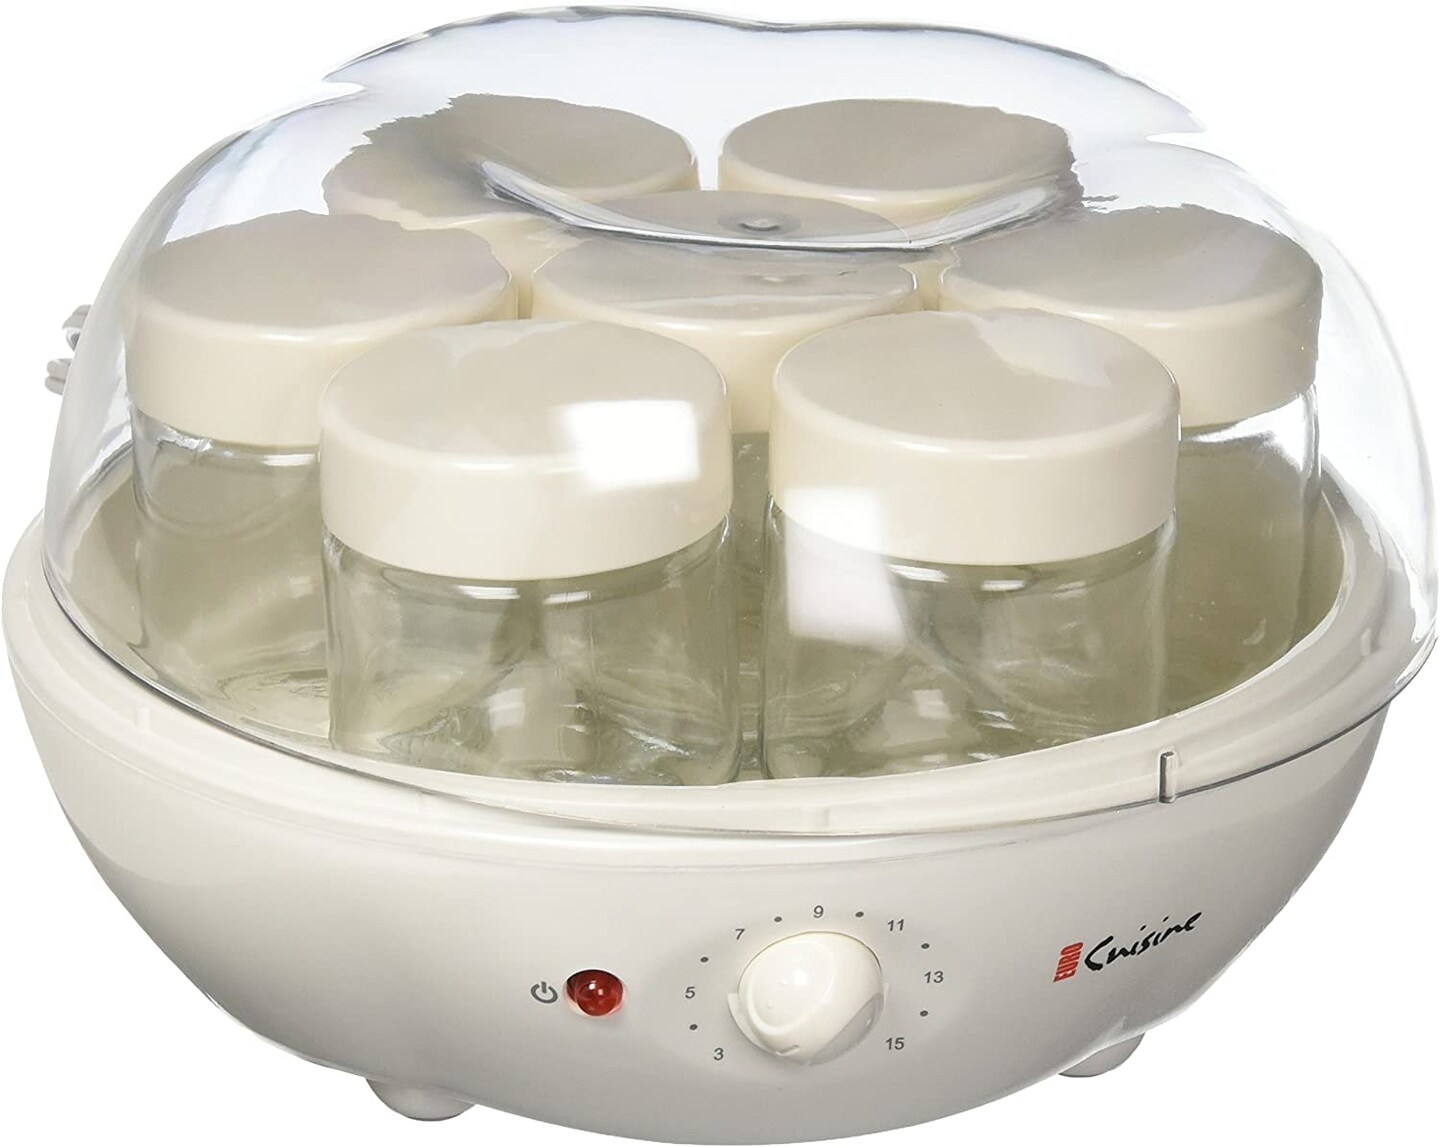 Euro Cuisine YM100 Automatic Electric Homemade Yogurt Maker with Serving Jars